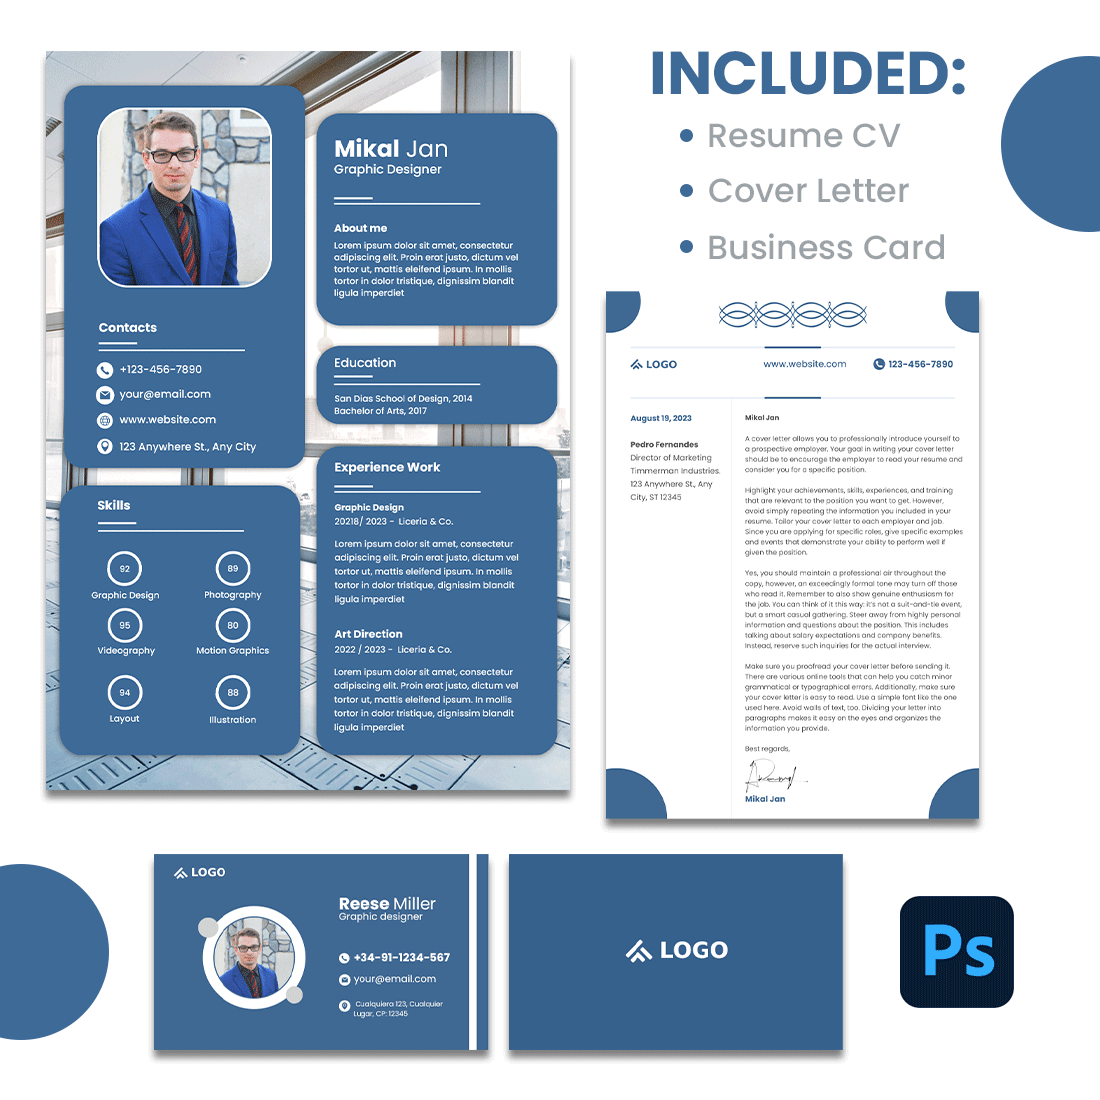 Blue and white resume template with a photo of a man.